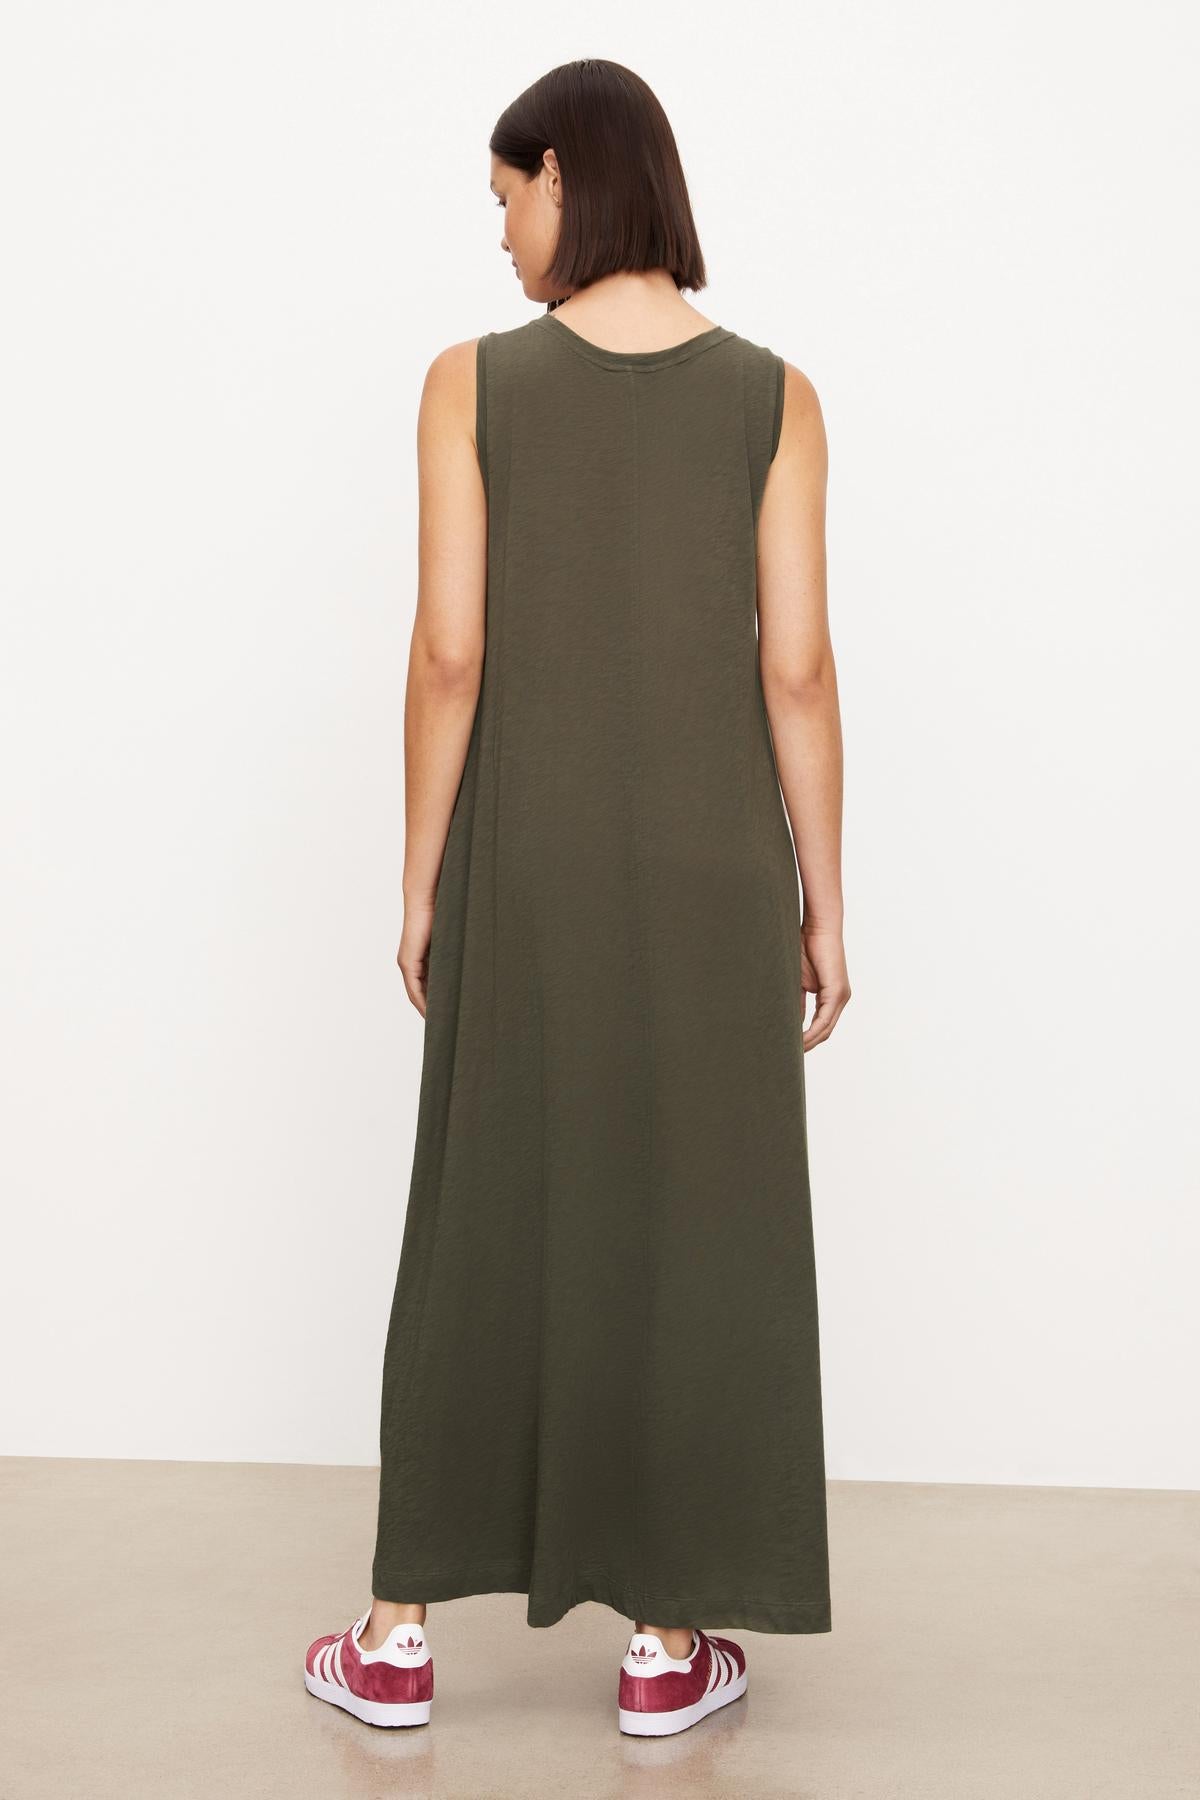   The back view of a woman wearing a green sleeveless Velvet by Graham & Spencer EDITH SLEEVELESS MAXI DRESS. 